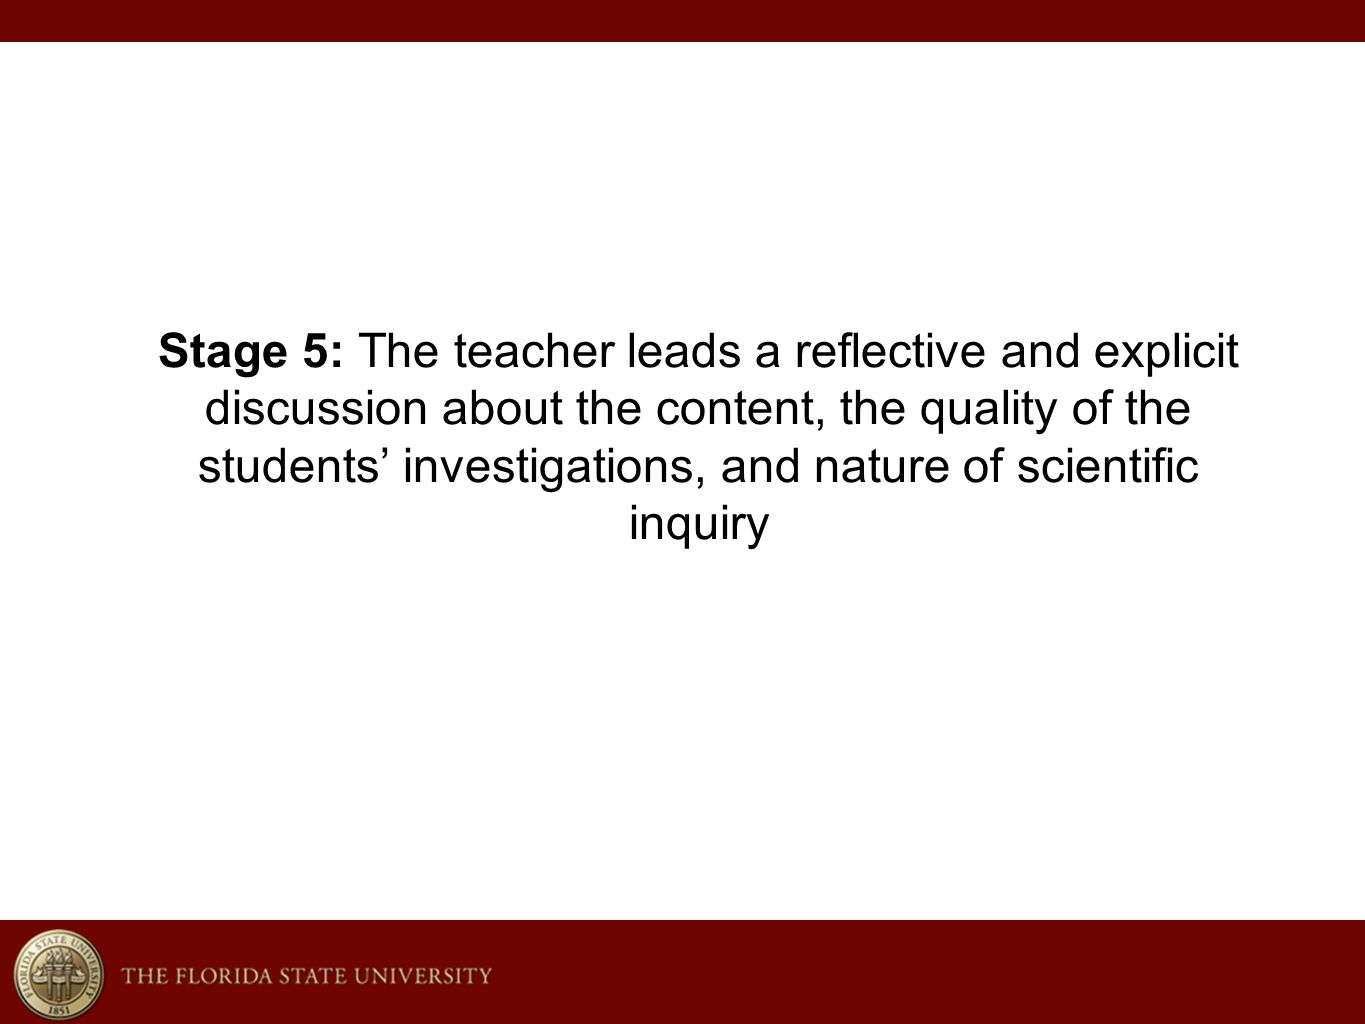 Stage 5: The teacher leads a reflective and explicit discussion about the content, the quality of the students’ investigations, and nature of scientific inquiry